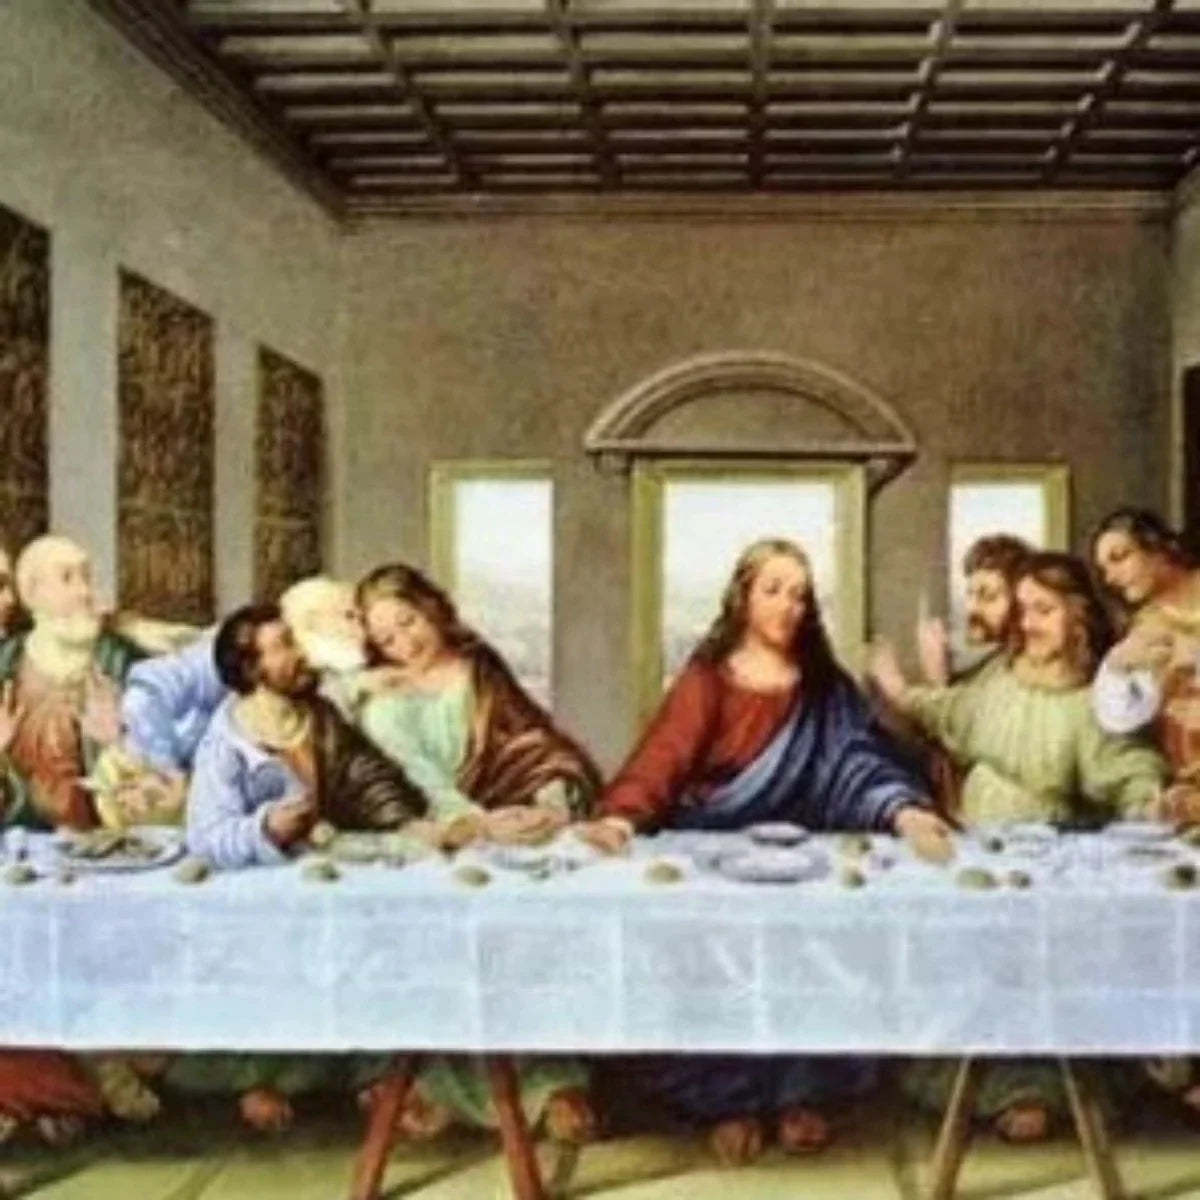 The Last Supper - Vintage Living Room Wall Art Decor